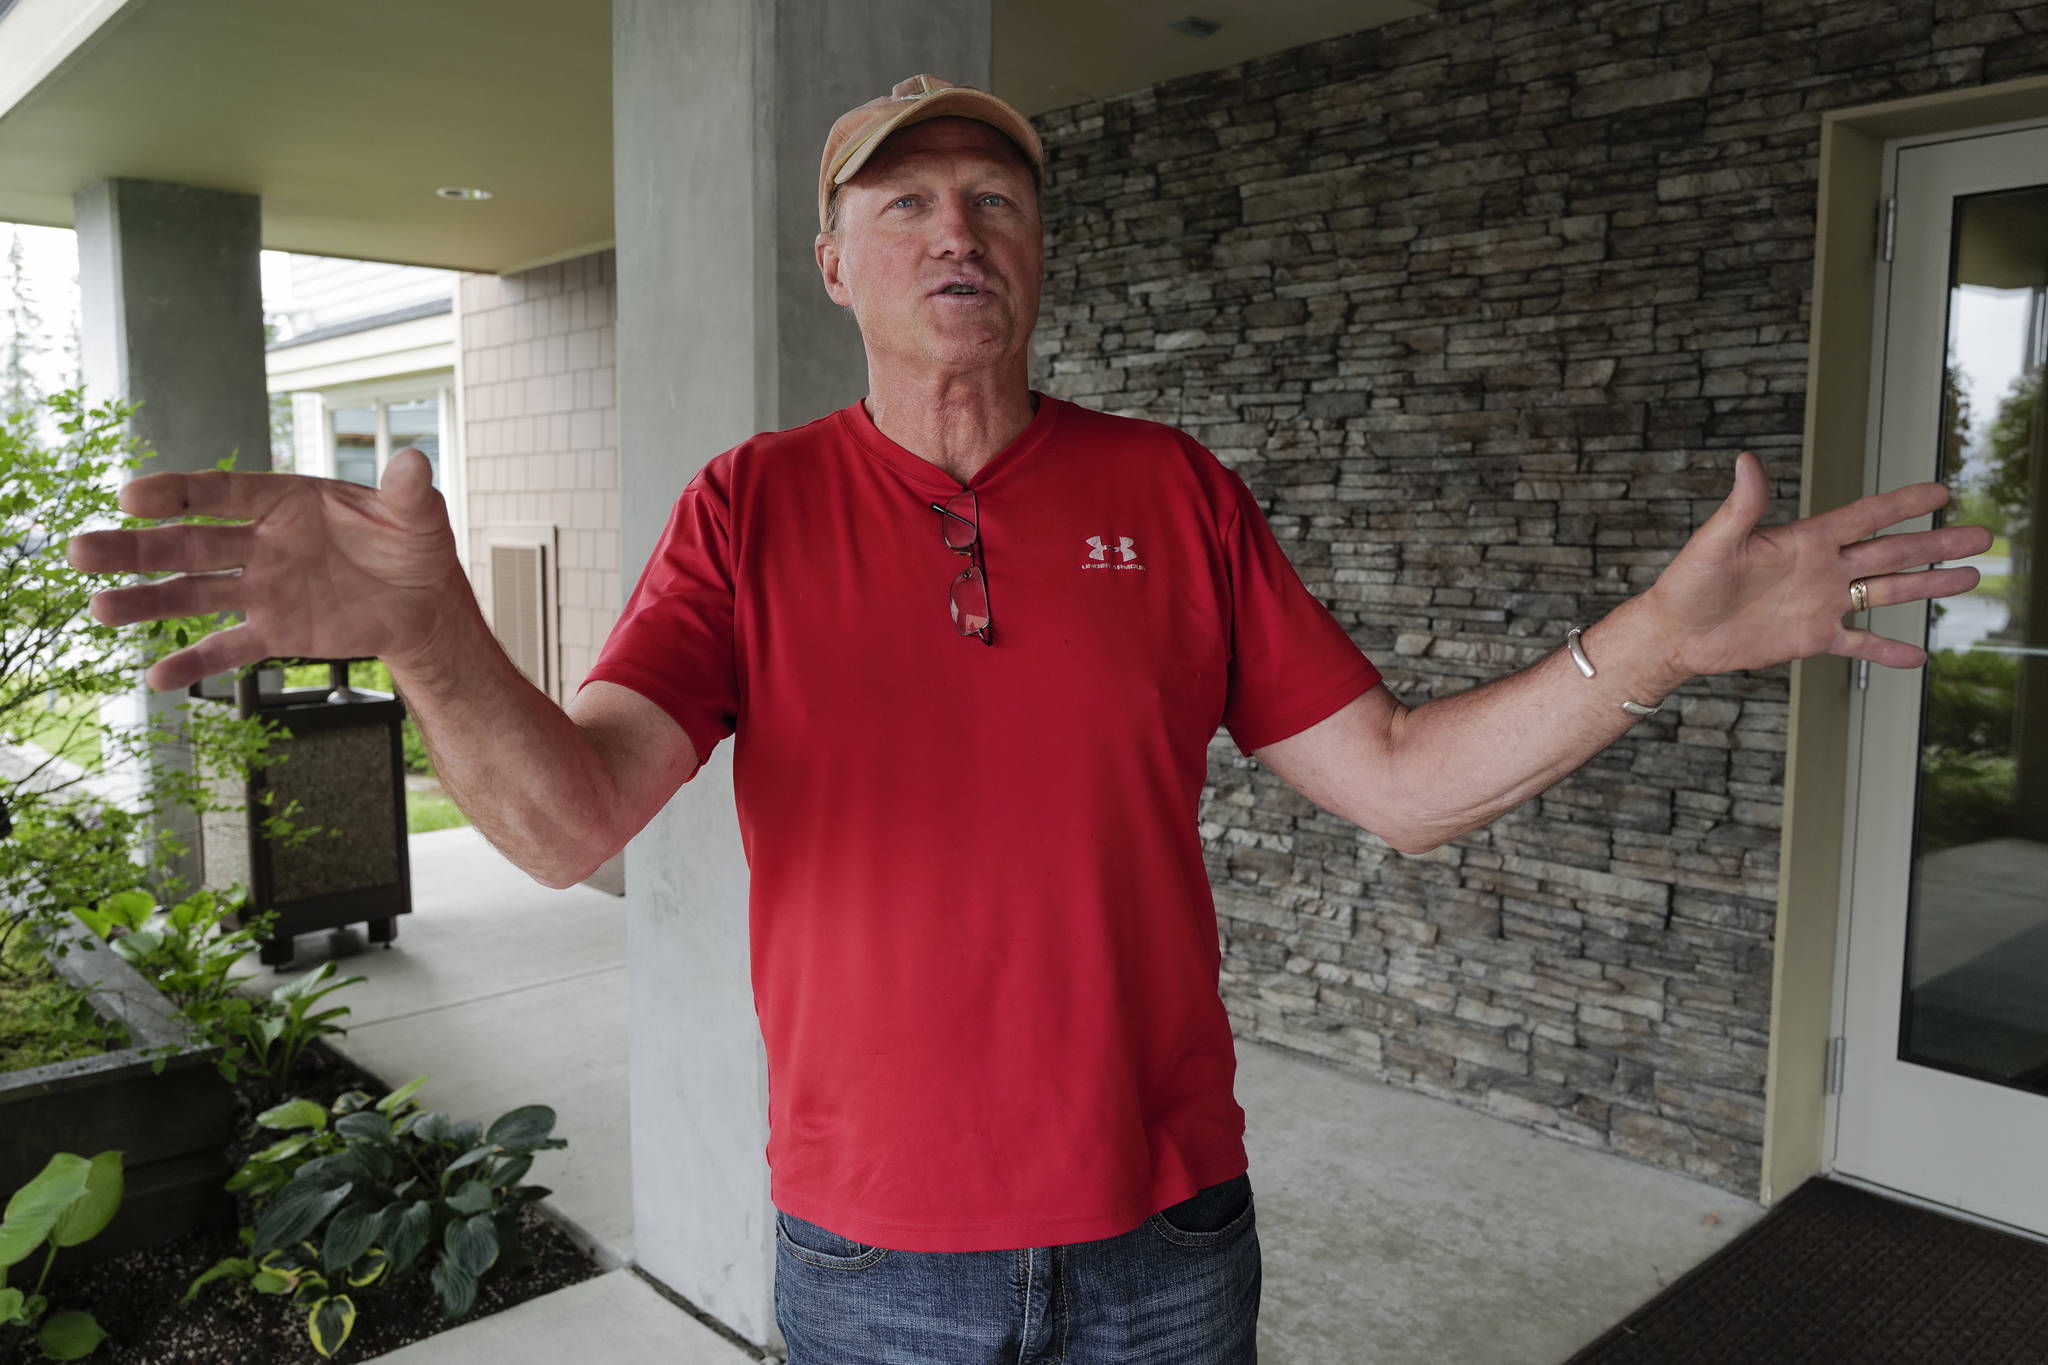 Gary Elliott of Connecticut talks about his frustration on the third day of the Inland Boatmen’s Union of the Pacific’s strike against the Alaska Marine Highway System at the Auke Bay Terminal on Friday, July 26, 2019. After spending six weeks traveling throughout Alaska and having a wonderful time, Elliott said he can’t wait to leave the state. Elliott said it is costing him $4,500 in cancelled ferry tickets, hotel, barge and airline costs to get out of Juneau this weekend. (Michael Penn | Juneau Empire)